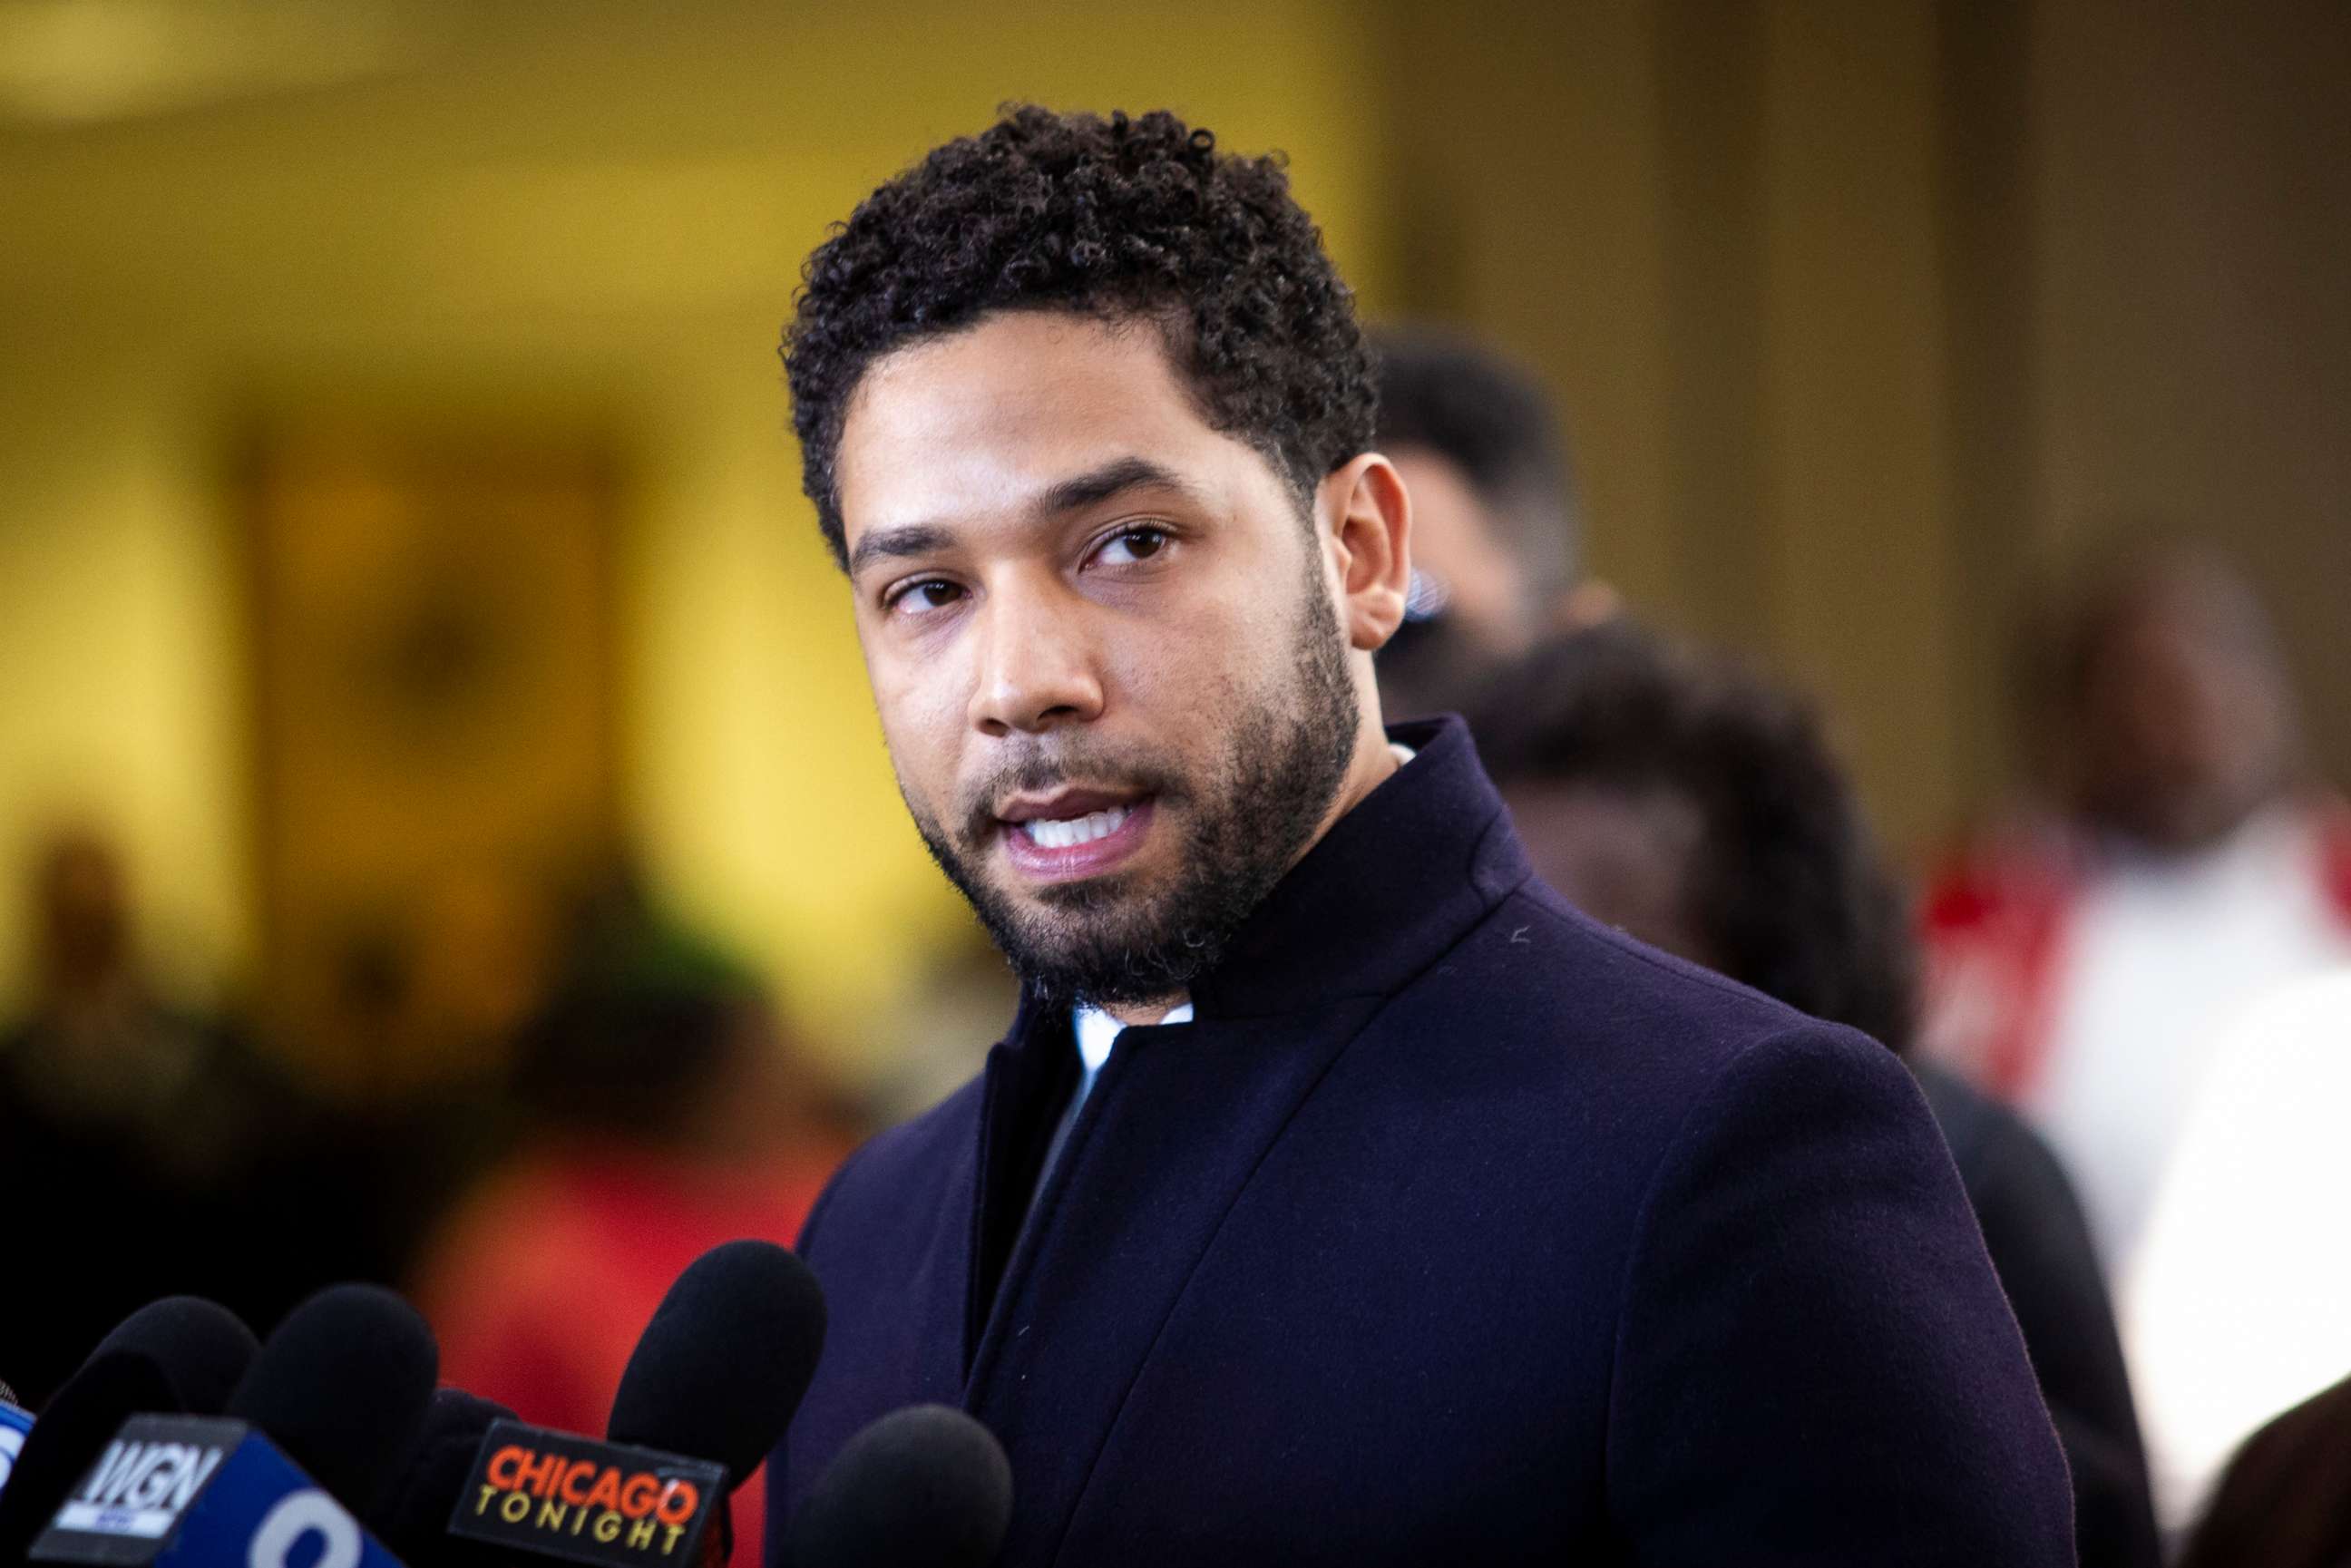 PHOTO: Actor Jussie Smollett speaks to reporters at the Leighton Criminal Courthouse in Chicago after prosecutors dropped all charges against him, March 26, 2019.